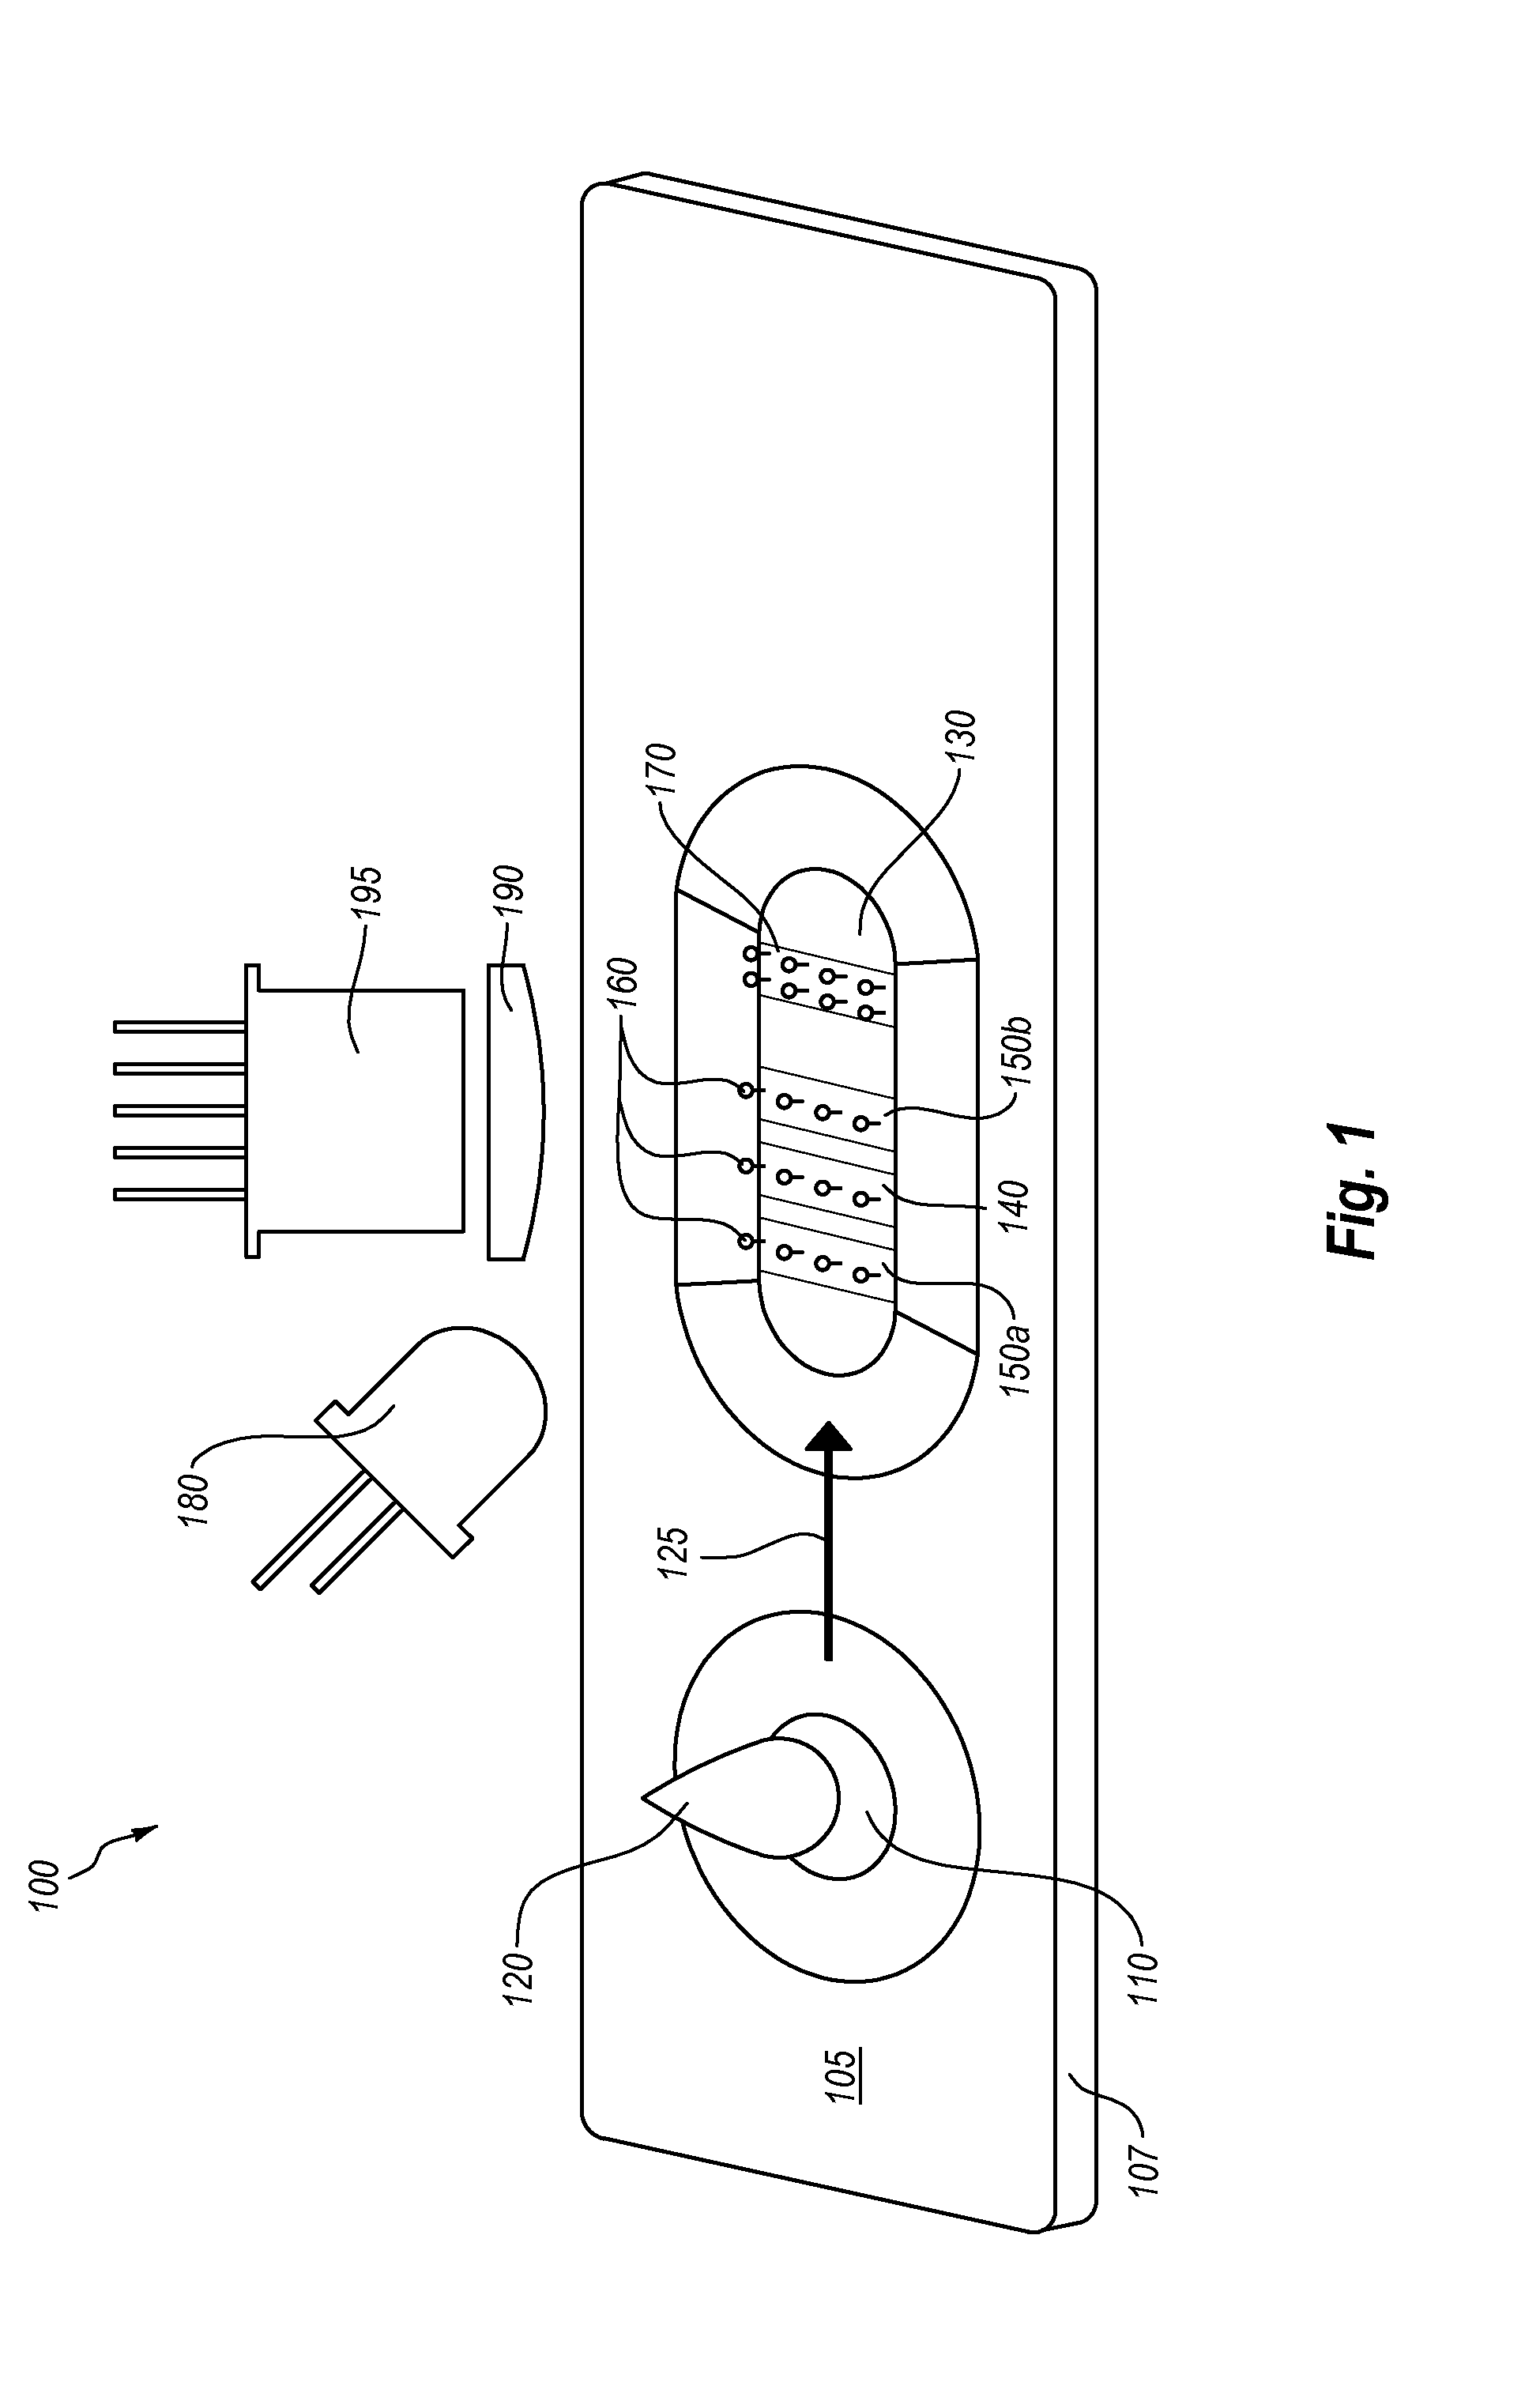 Device for performing a diagnostic test and methods for use thereof